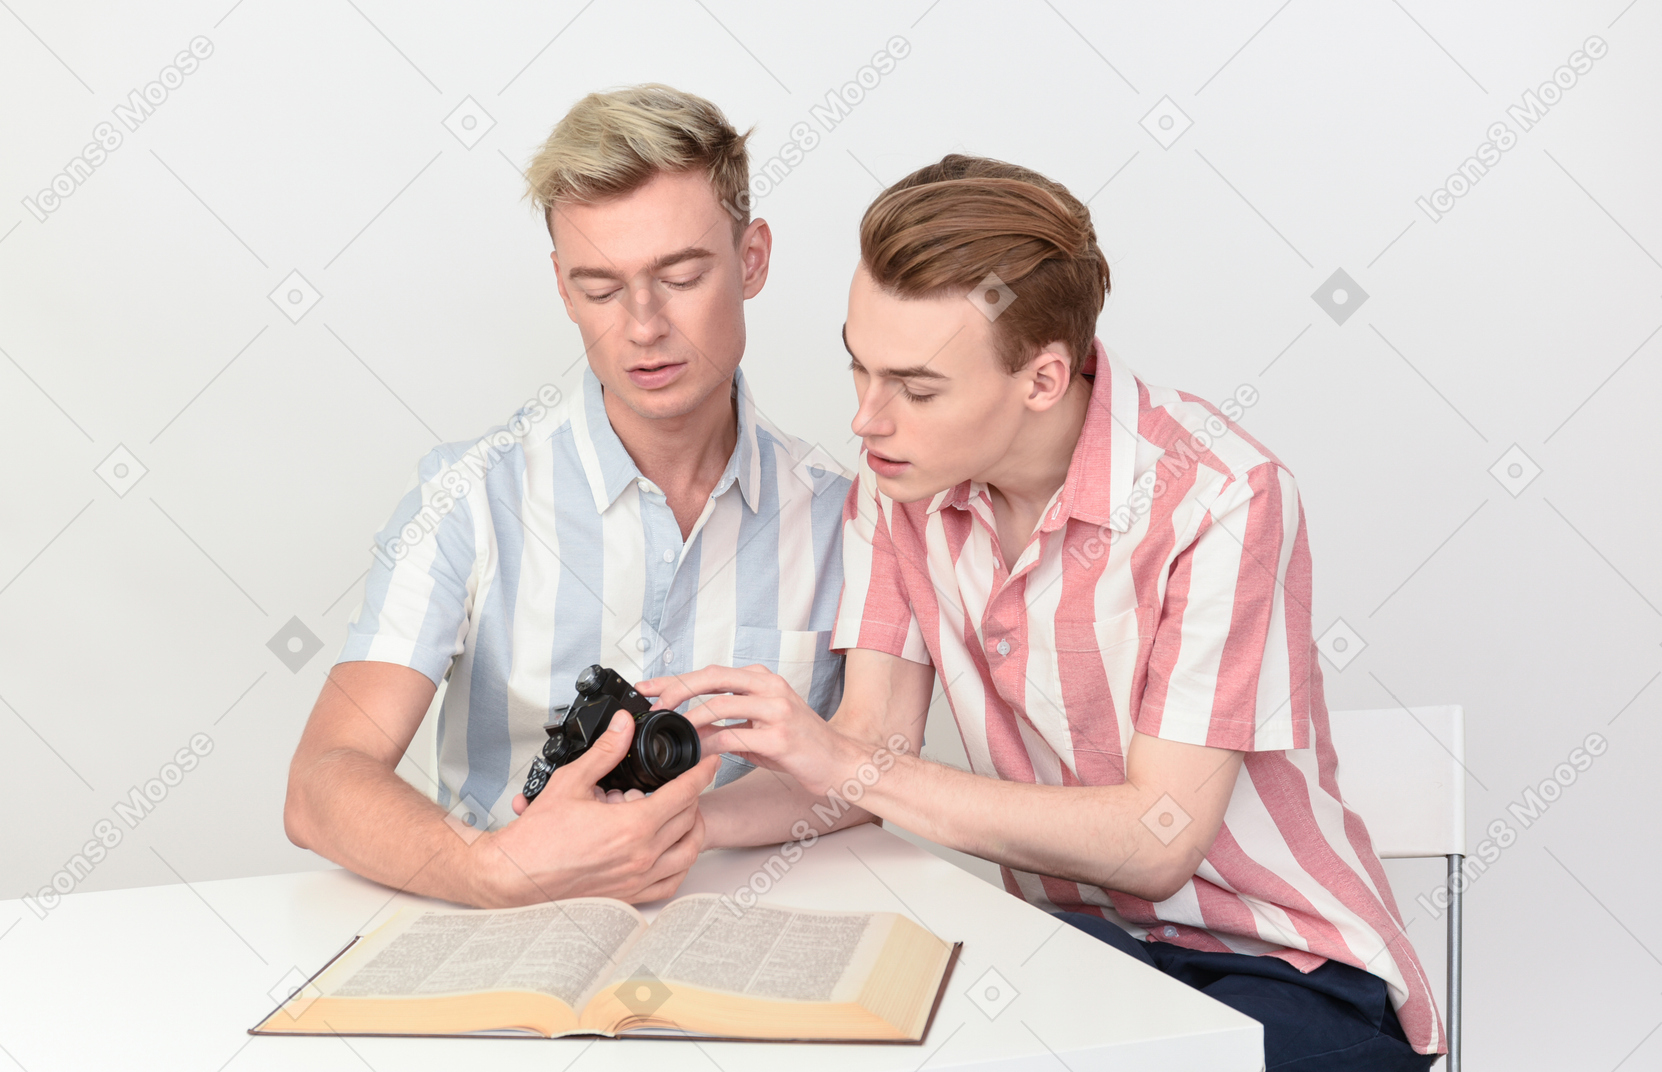 Gay couple focused on figuring out how to use camera